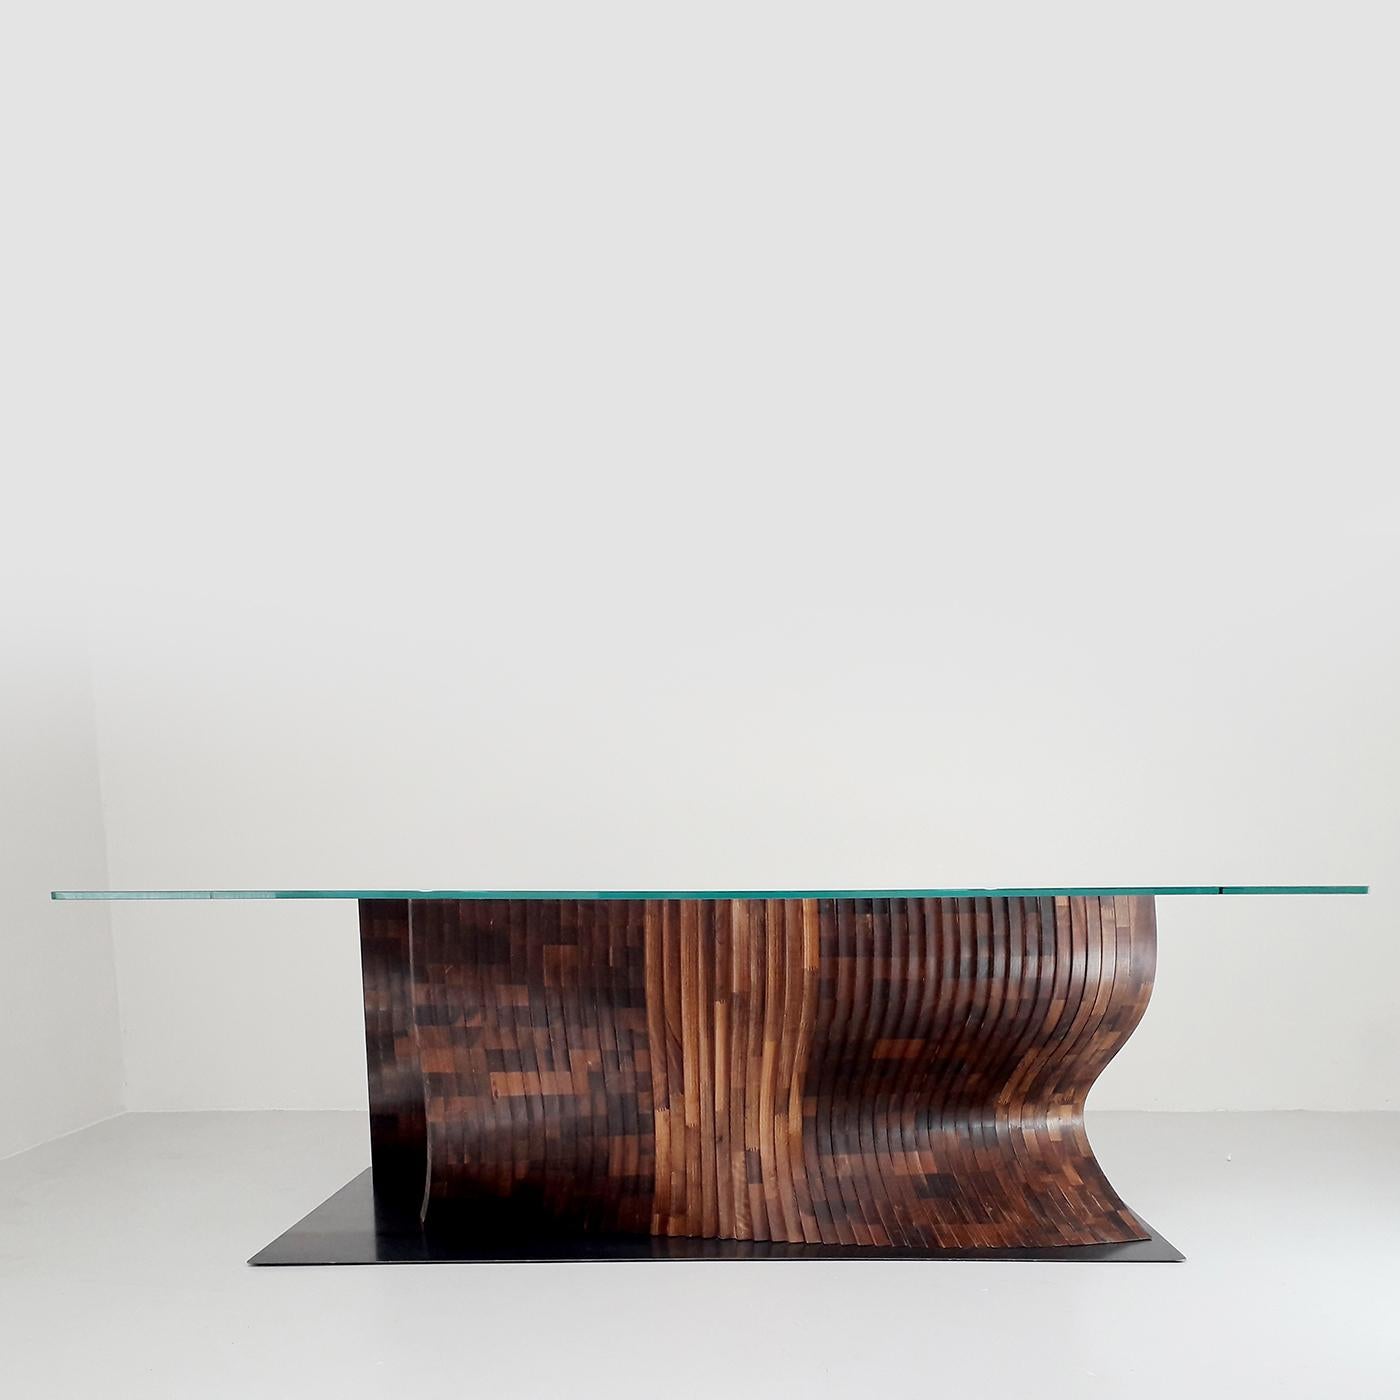 This unique table features a visually striking contrast between volume, shape and material. Its barely there, geometric, extra-transparent top stands against its large, undulating base in Canaletto walnut with a checkerboard motif, creating a look